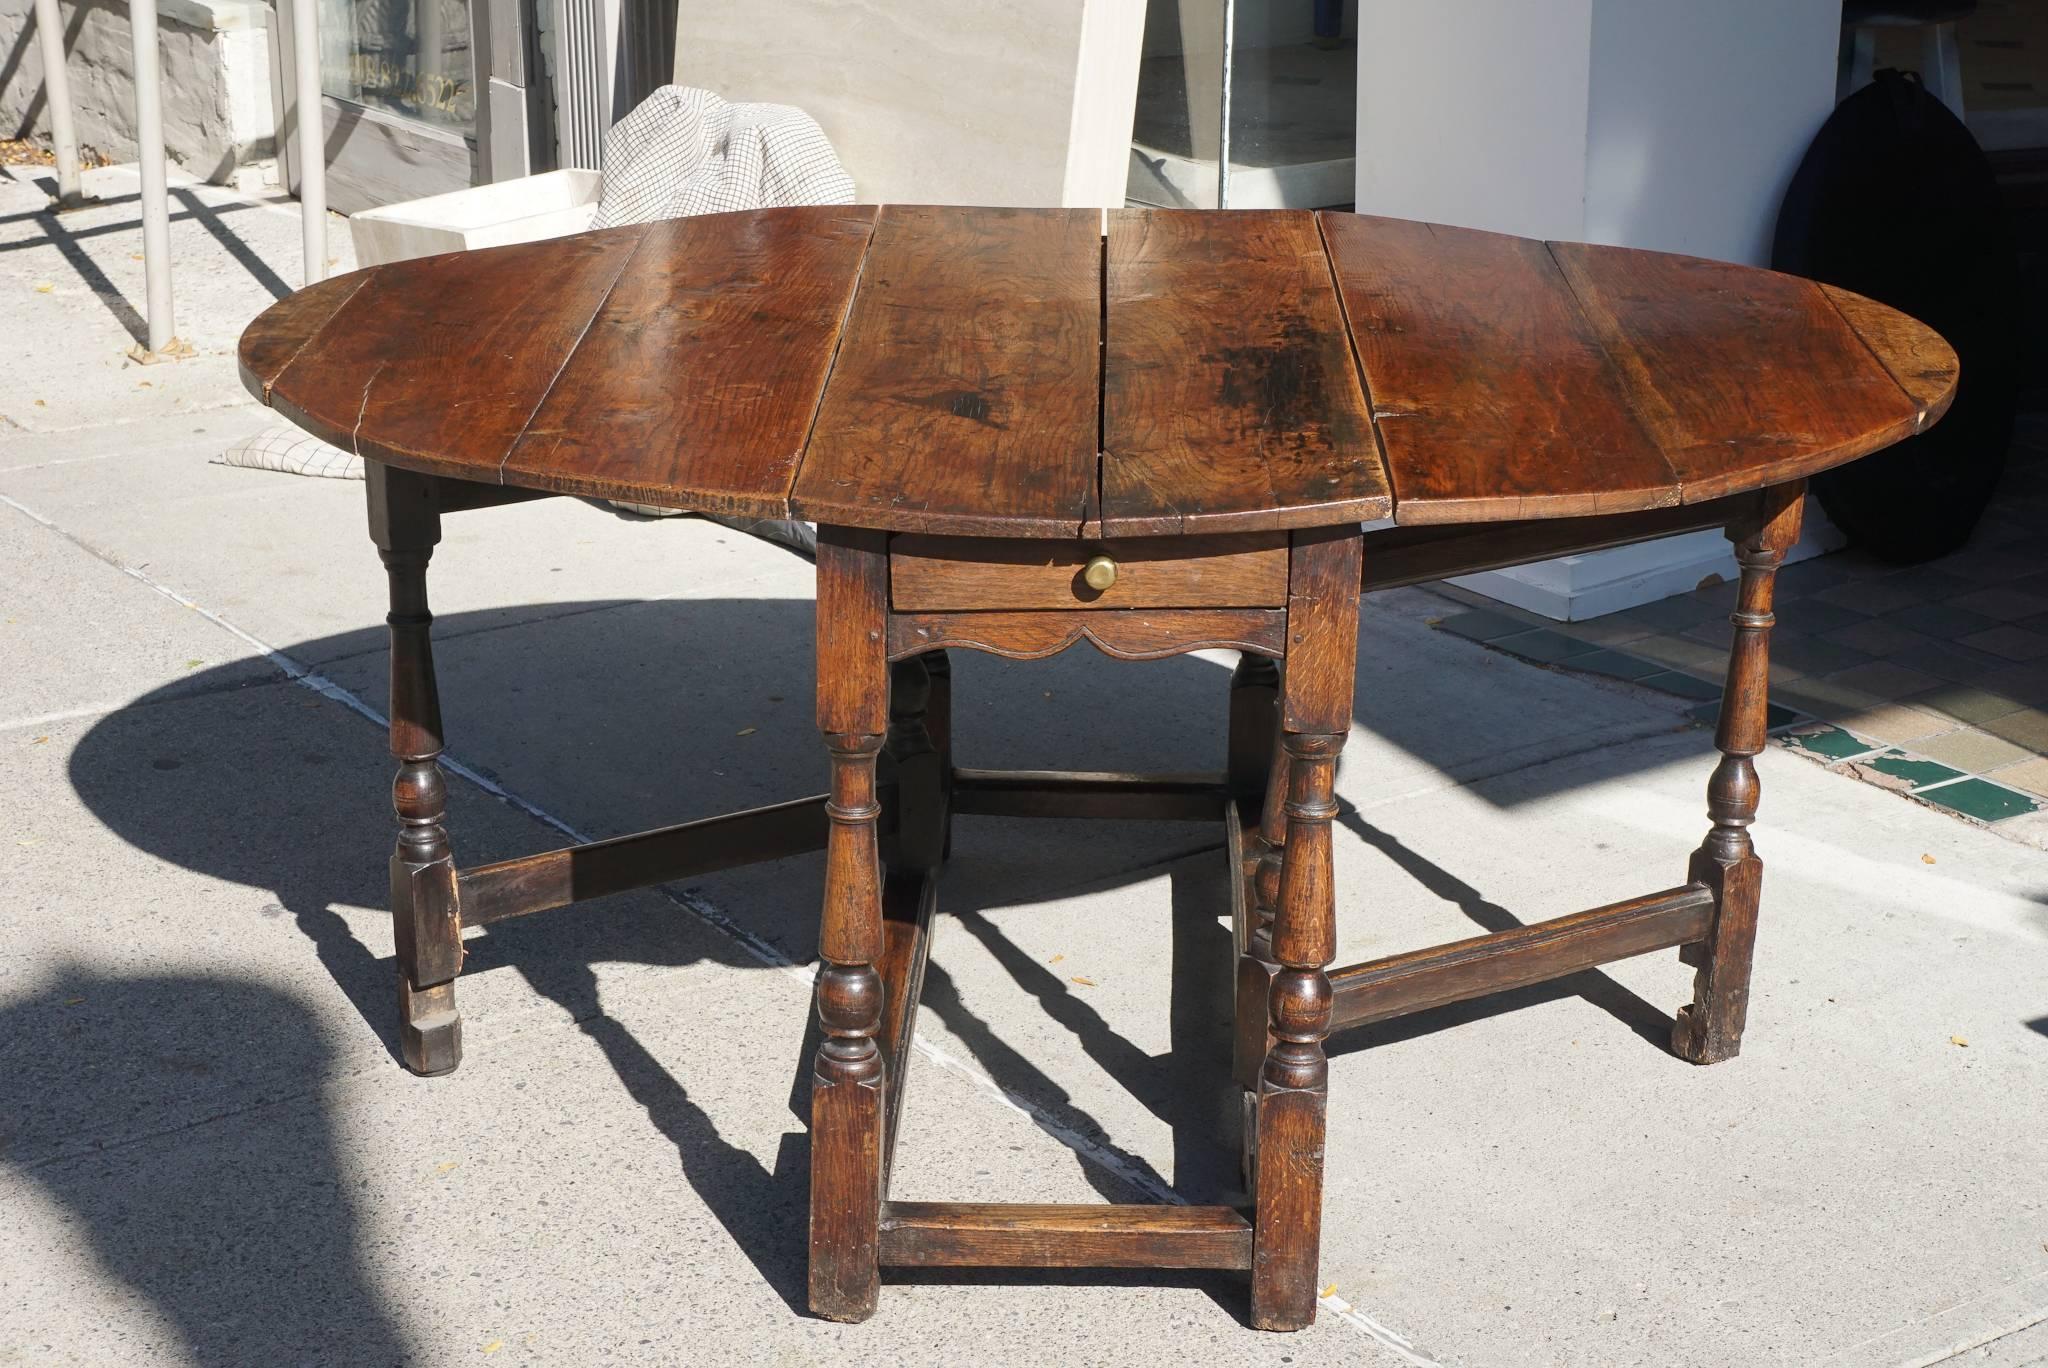 This lovely table crafted from yew wood is of typical gate leg form. This form of furniture was used hard and designed as a work horse in rural settings and the well worn areas and staining to the top are all attributes that add character to the